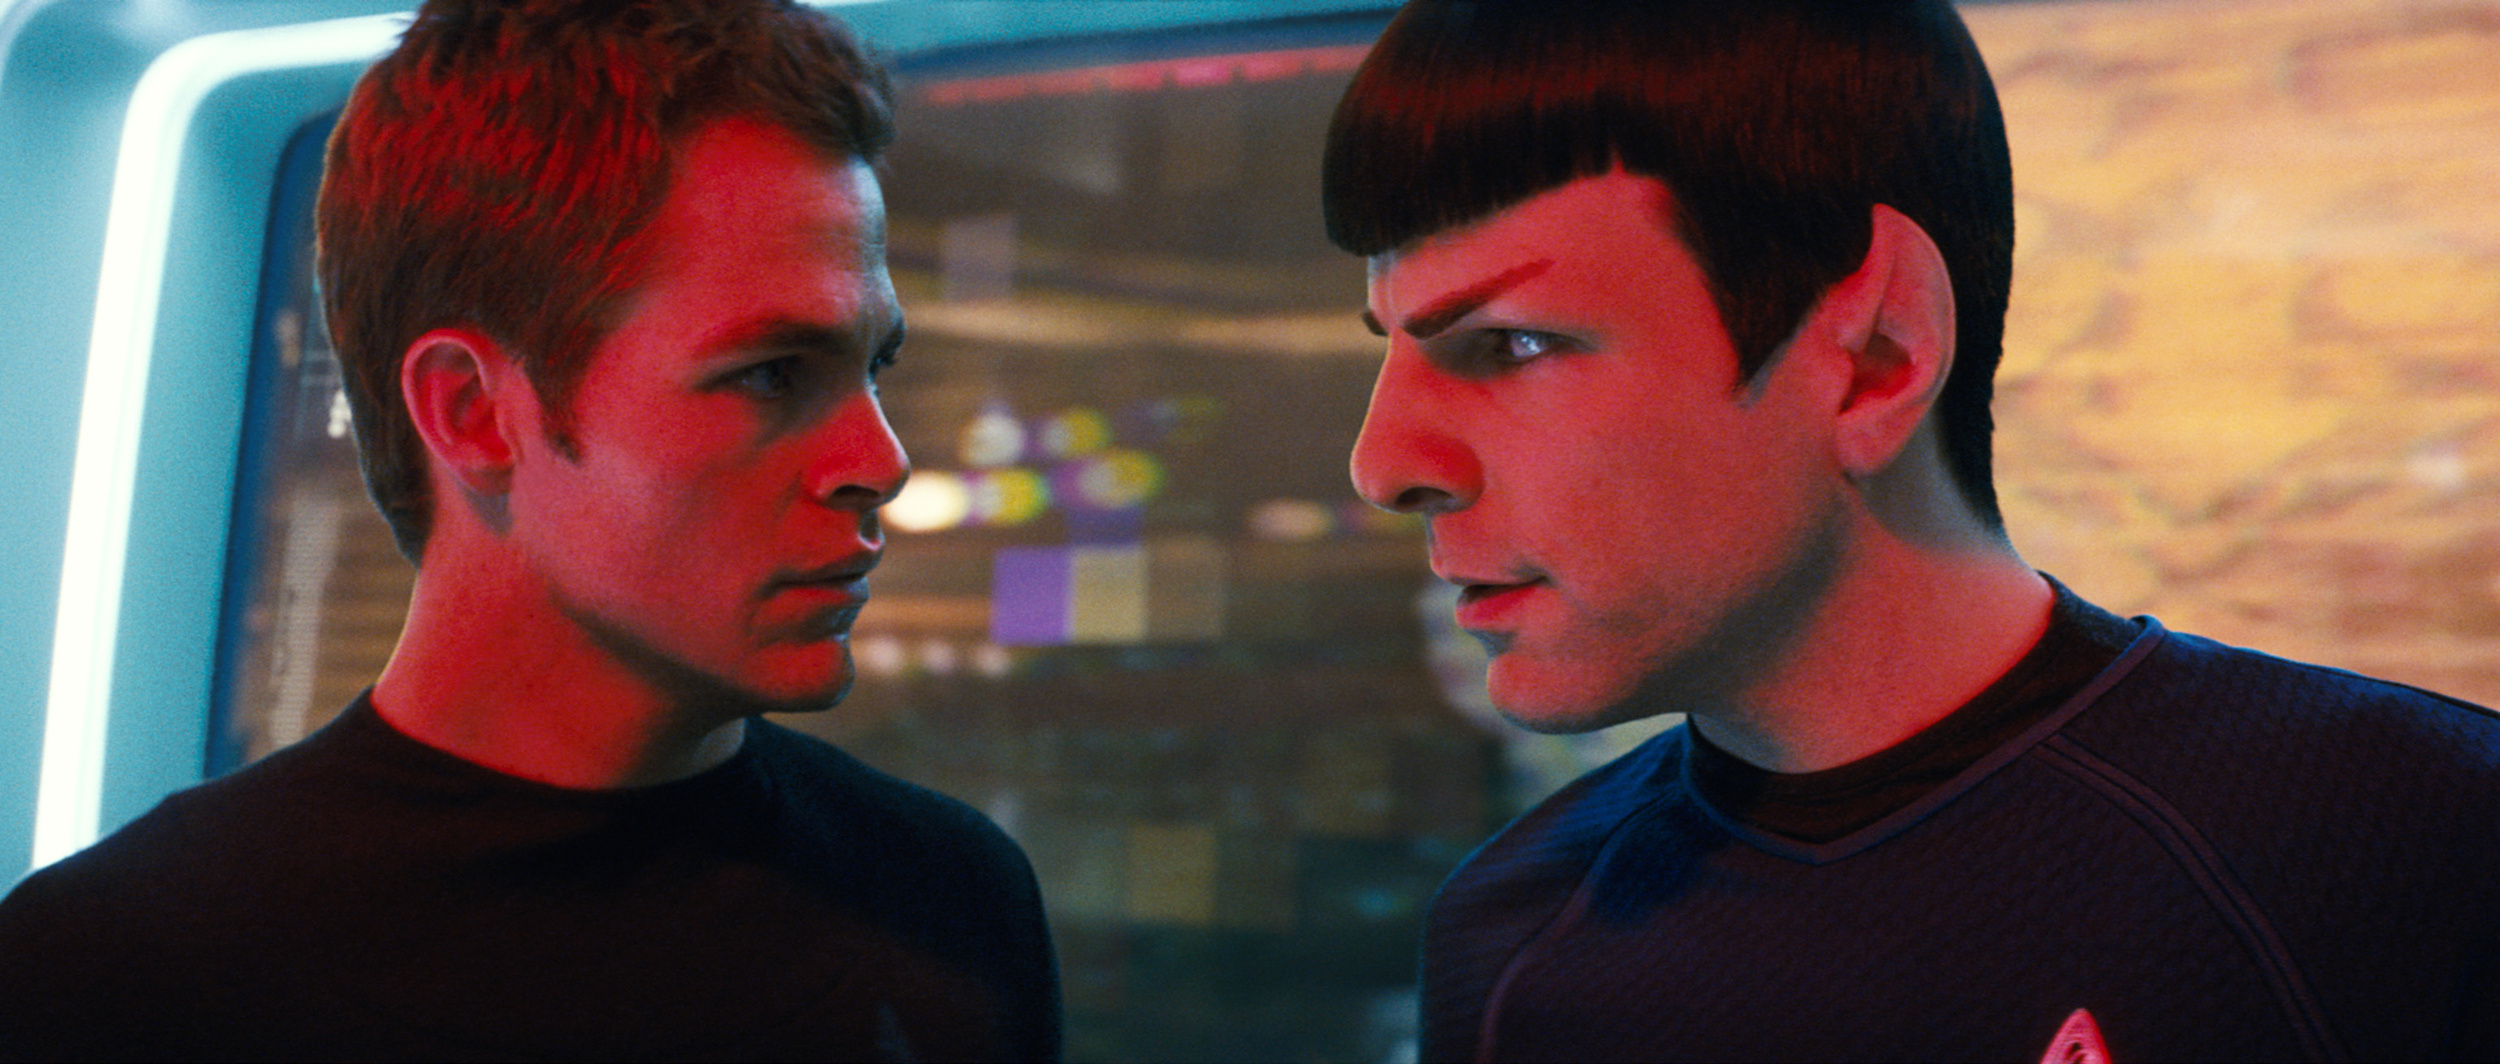 <p>When they decided to reboot<em> Star Trek</em>, they also decided to add some time travel into the mix. This made for a time-and-space hopping story, for starters. However, it also allowed them to have Leonard Nimoy show up to play older Spock, giving this movie two different Spocks!</p><p><a href='https://www.msn.com/en-us/community/channel/vid-cj9pqbr0vn9in2b6ddcd8sfgpfq6x6utp44fssrv6mc2gtybw0us'>Follow us on MSN to see more of our exclusive entertainment content.</a></p>